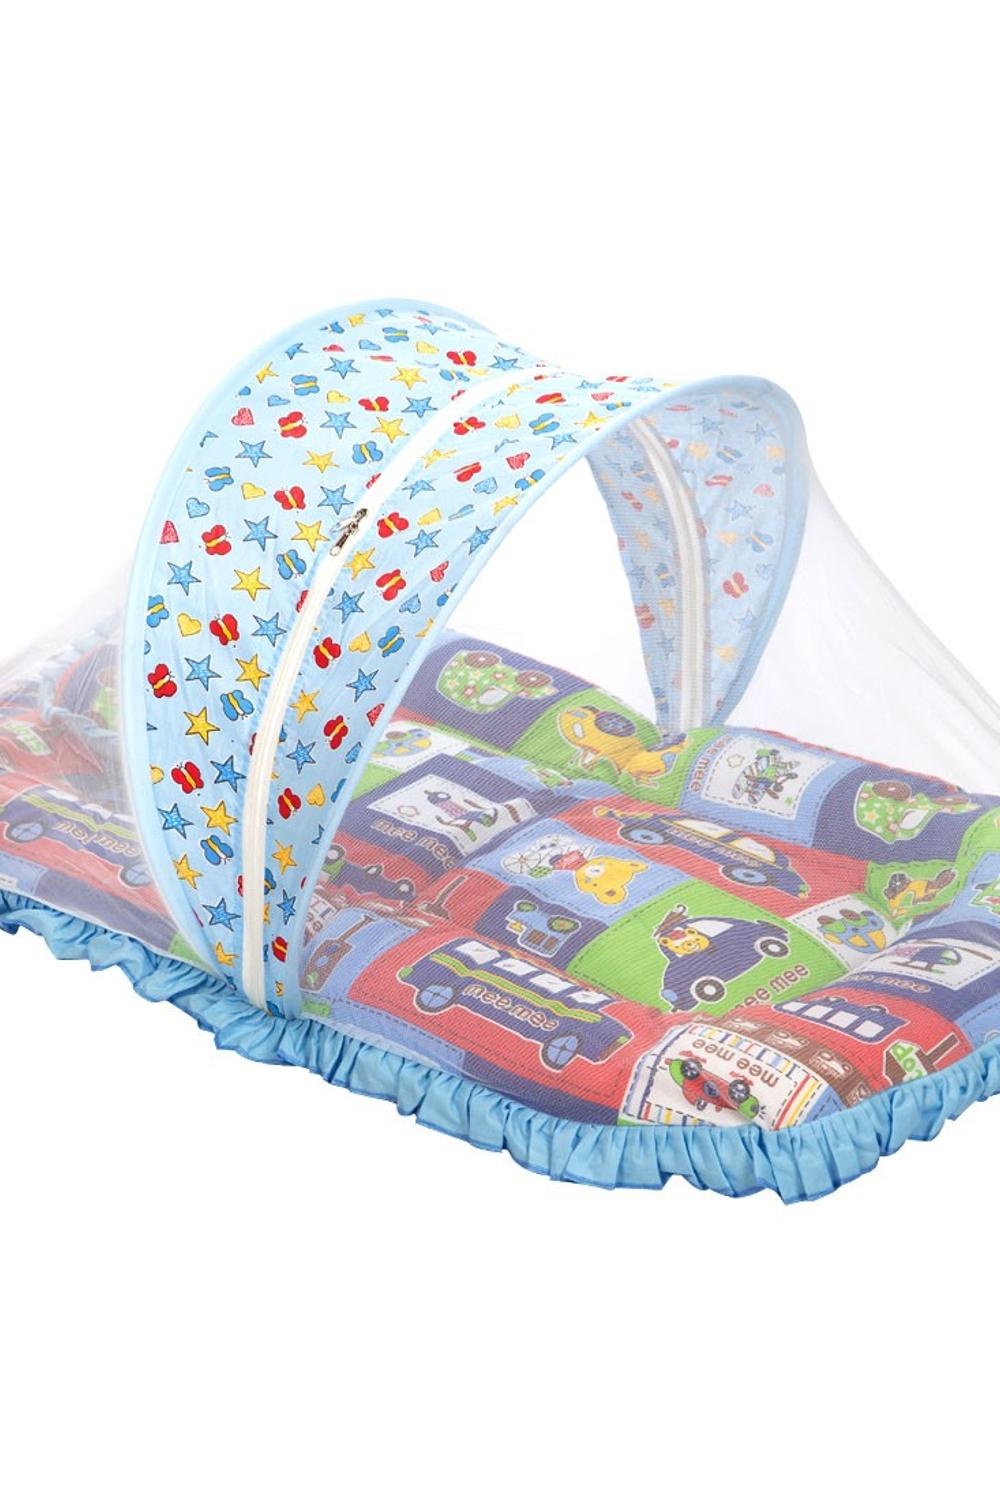 Blue Baby Mattress Set with Mosquito Net and Pillow